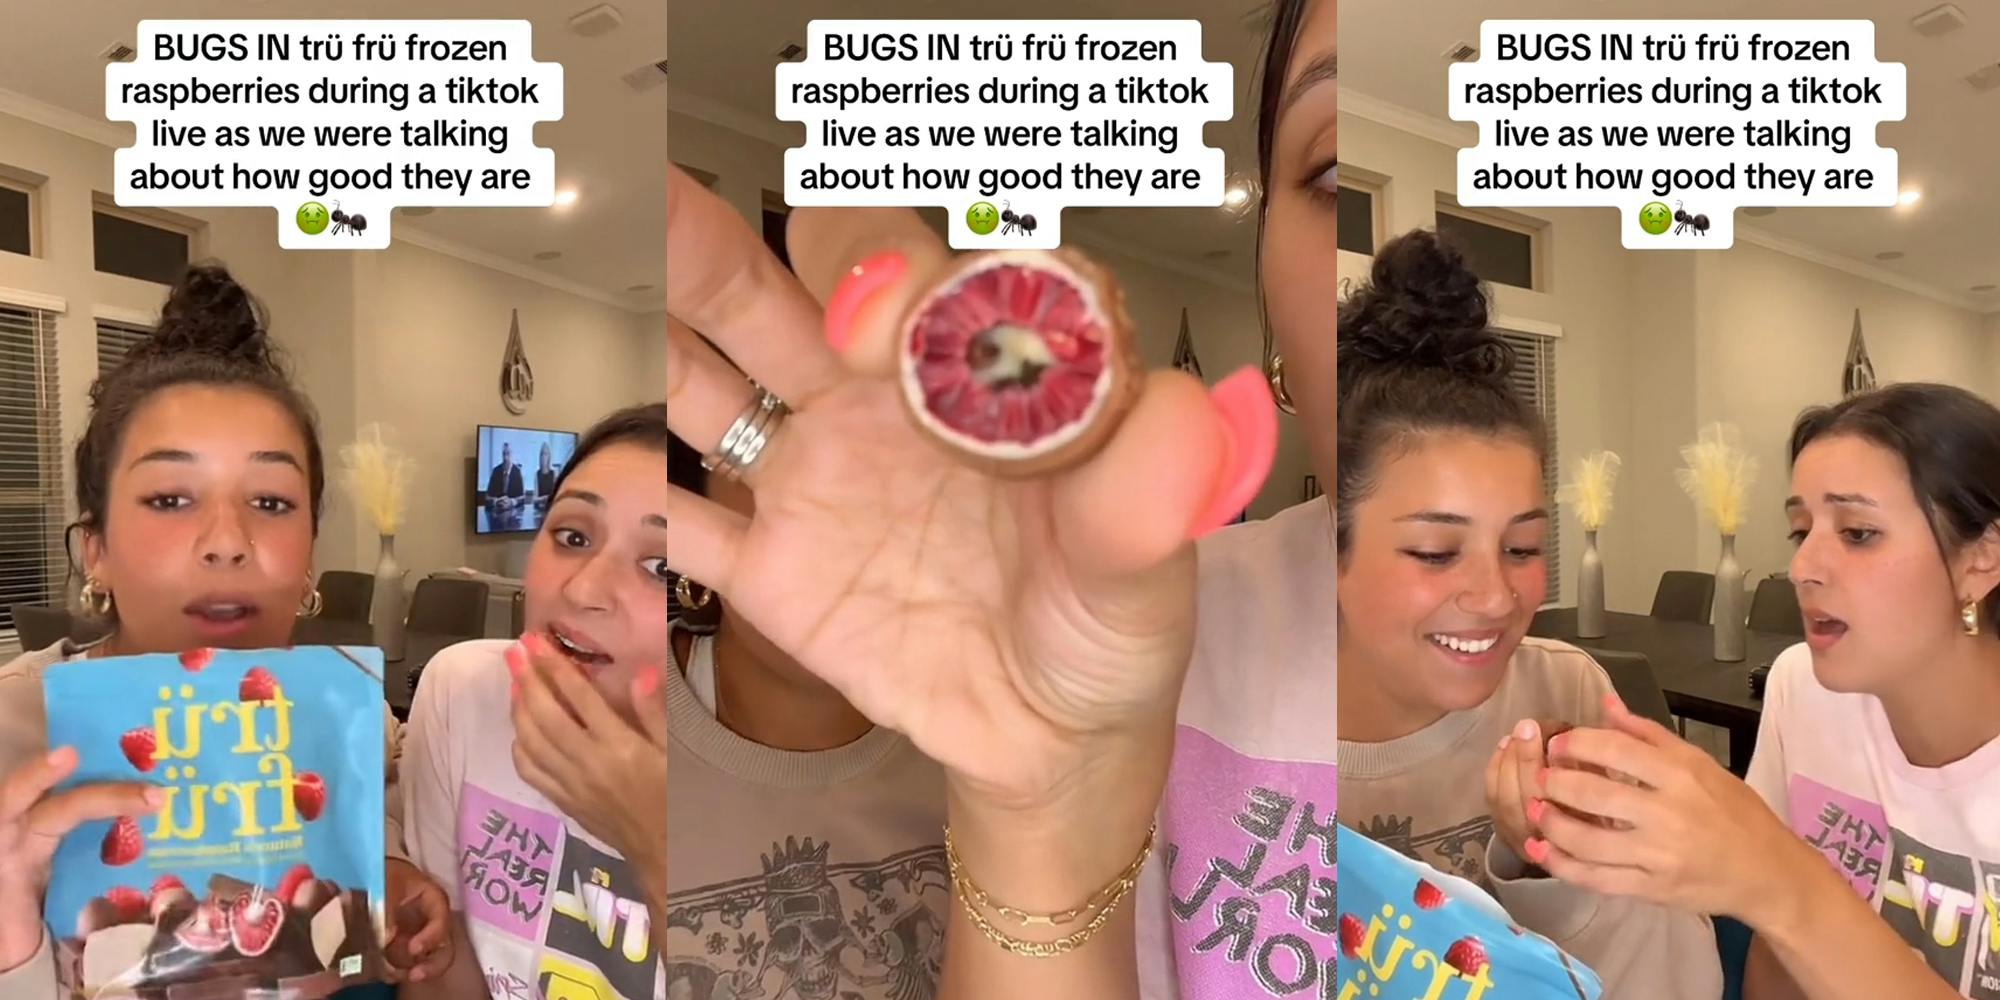 Tru Fru customers with bag and caption "BUGS IN tru fru frozen raspberries during a tiktok live as we were talking about how good they are" (l) Tru Fru customers holding bit one with caption "BUGS IN tru fru frozen raspberries during a tiktok live as we were talking about how good they are" (c) Tru Fru customers looking at bit frozen raspberry with caption "BUGS IN tru fru frozen raspberries during a tiktok live as we were talking about how good they are" (r)